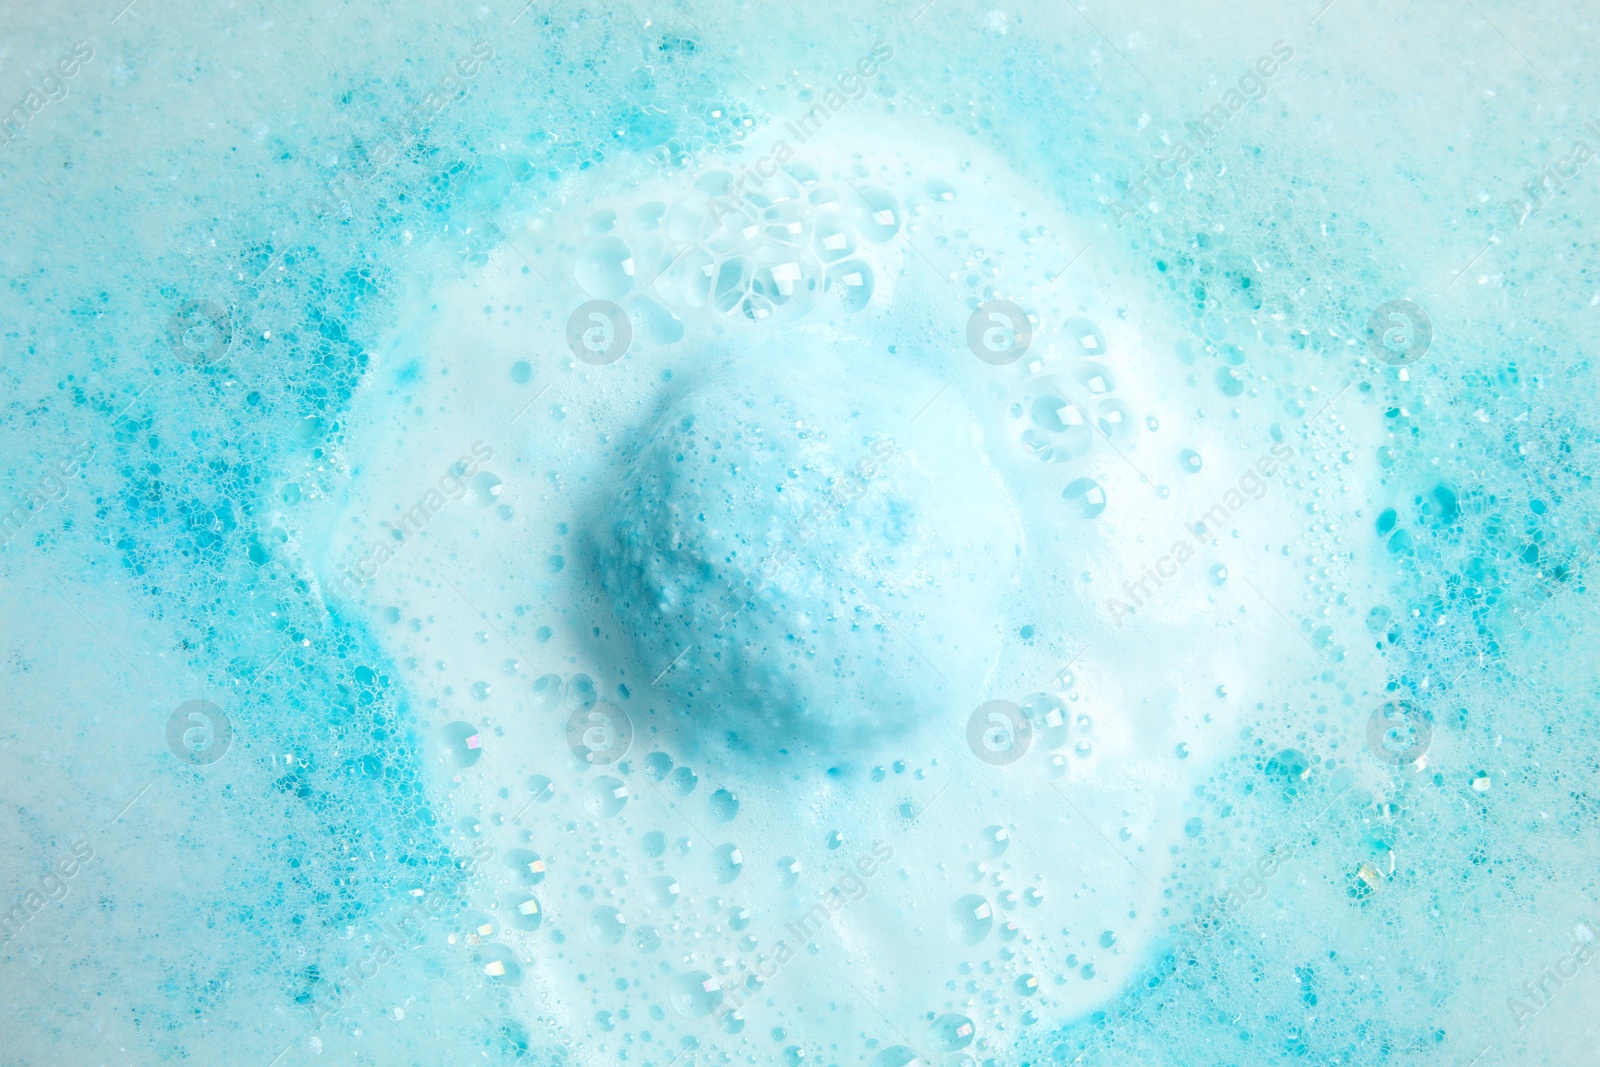 Photo of Color bath bomb dissolving in water, top view